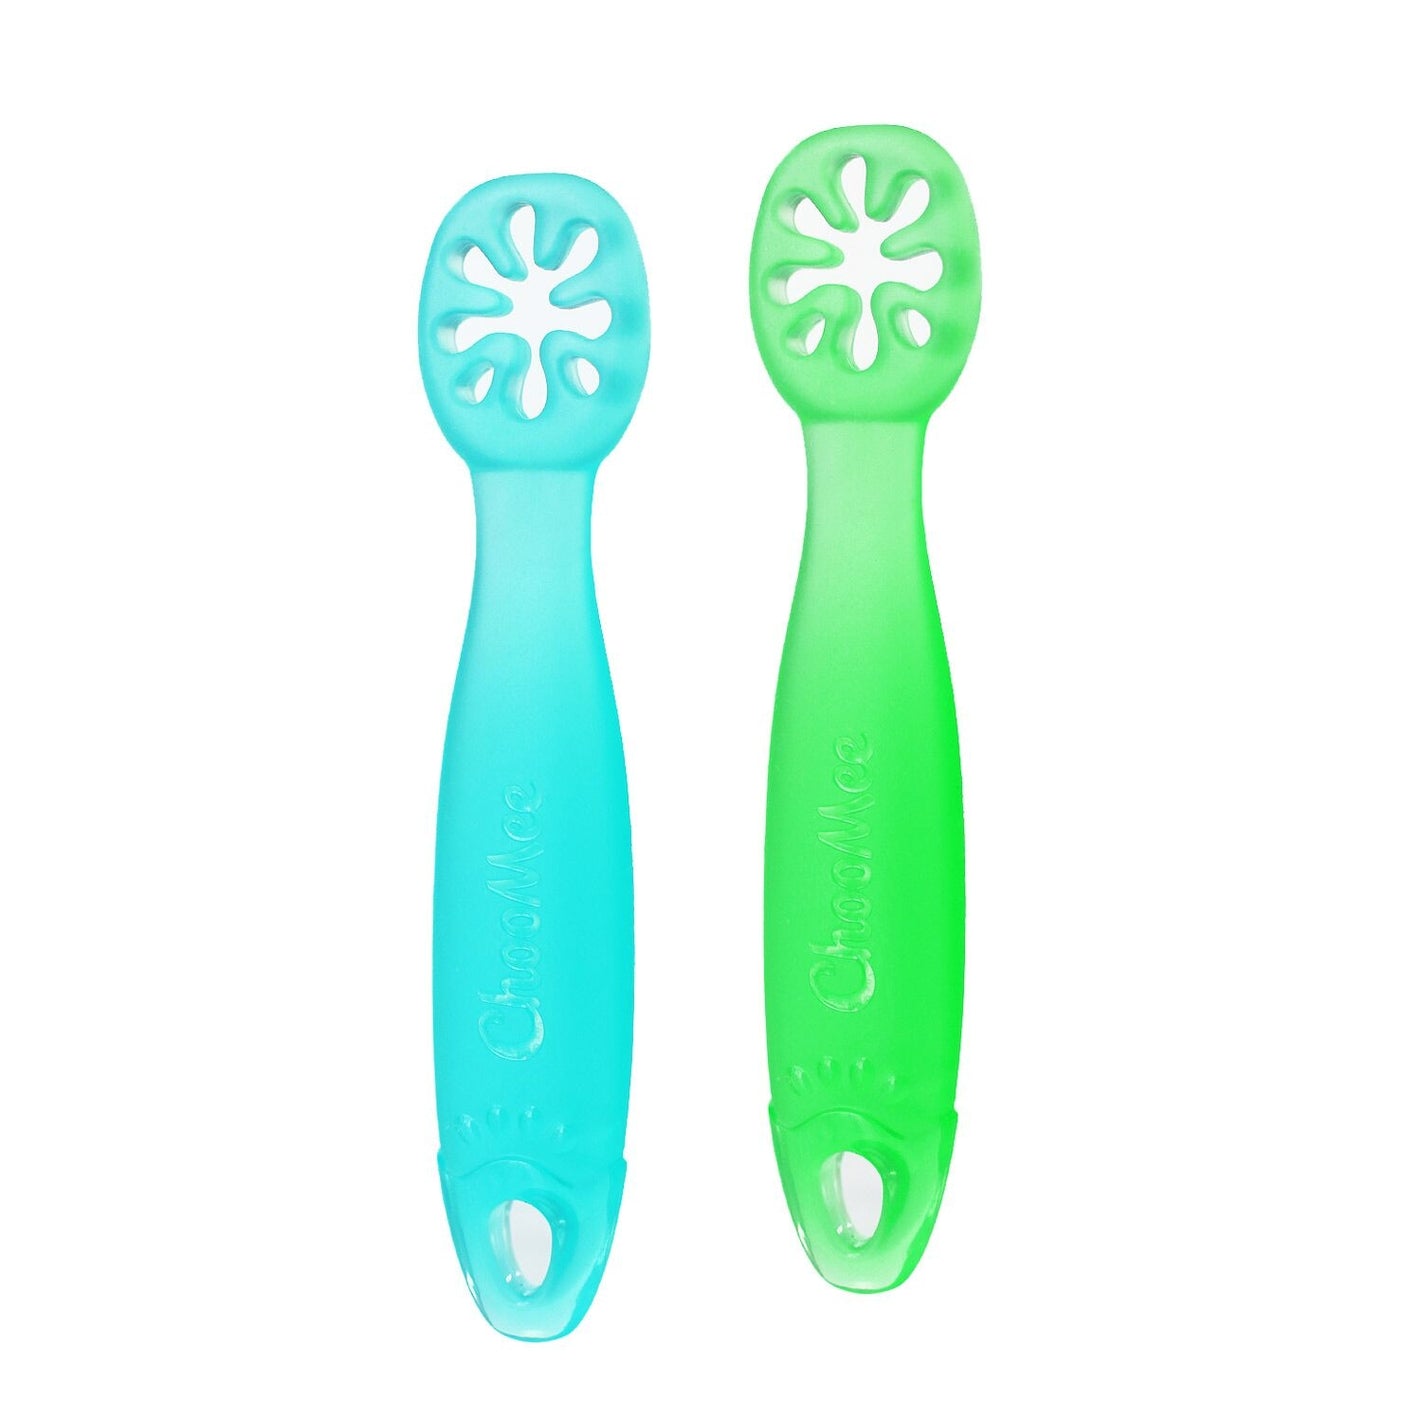 FlexiDip Silicone Learning Utencil (2 pack)